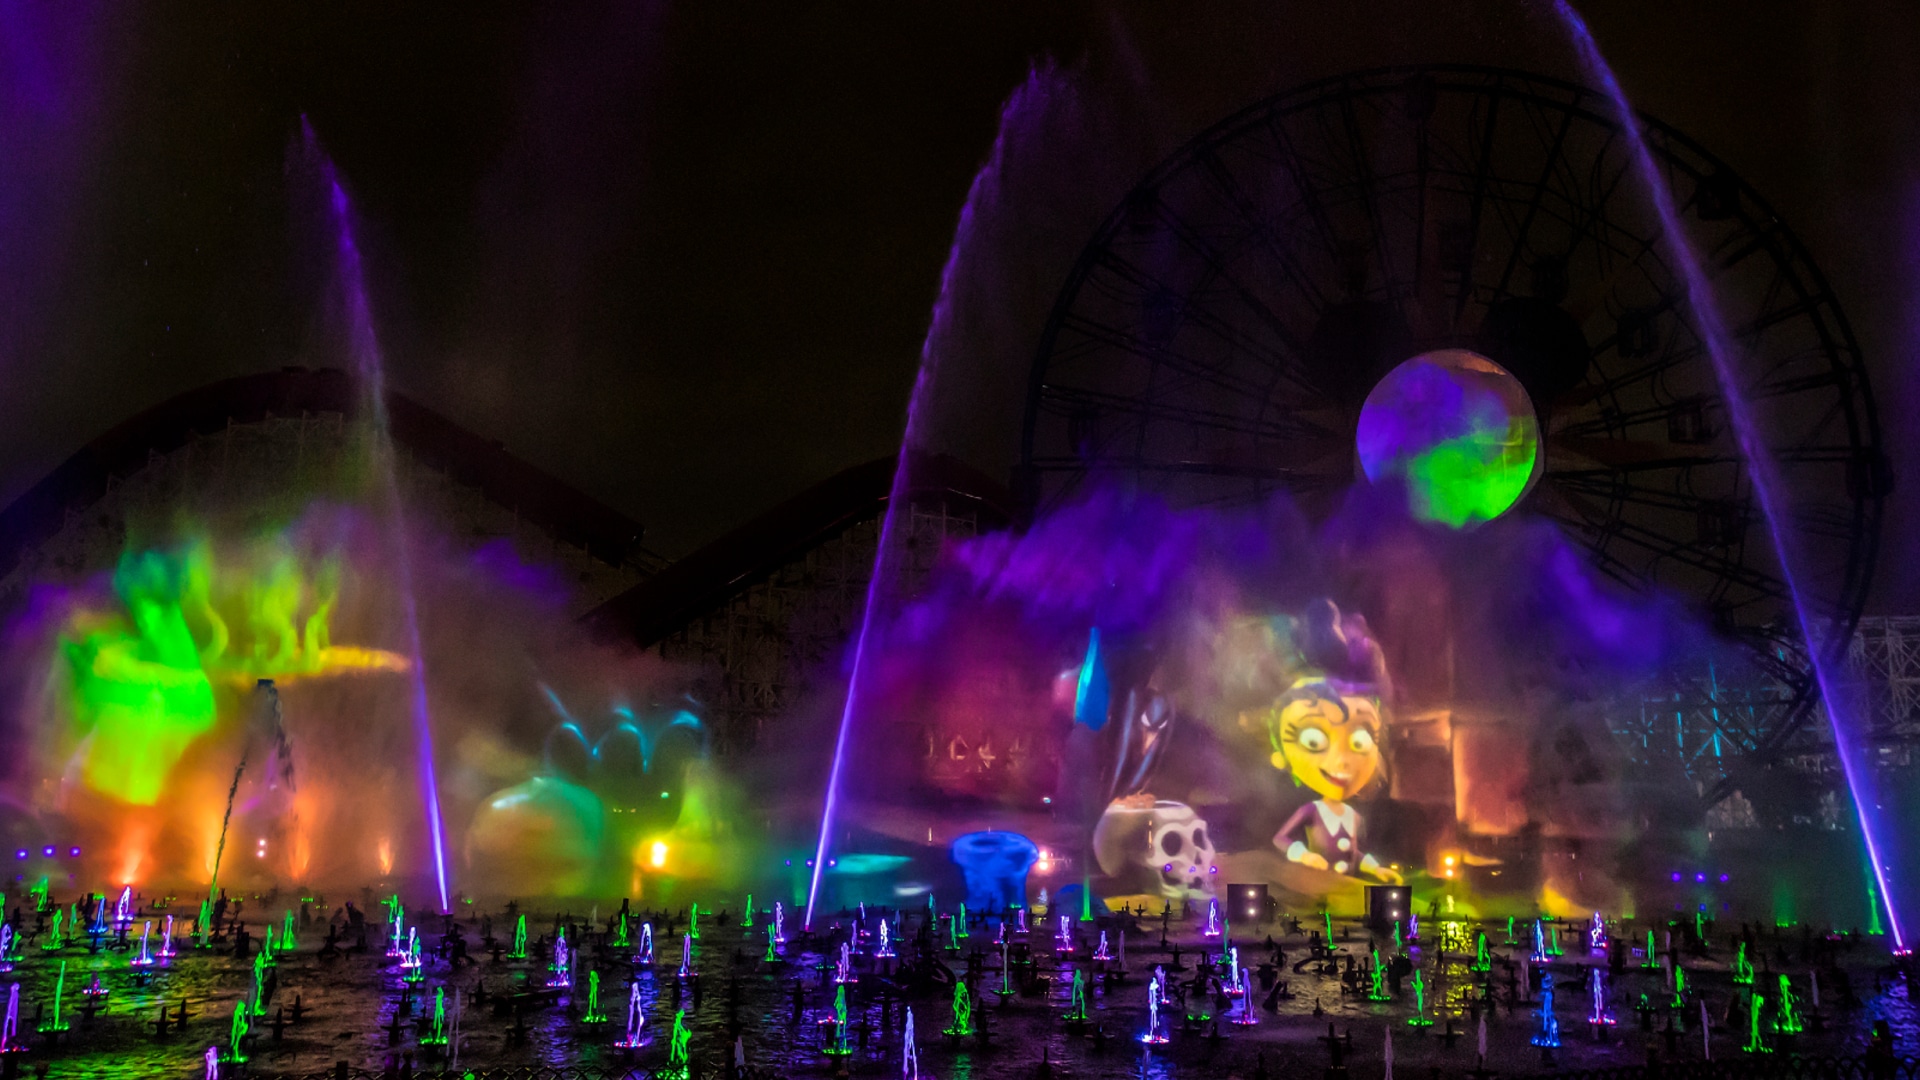 New VILLAINOUS! World of Color to Debut at Oogie Boogie Bash—A Disney Halloween Party